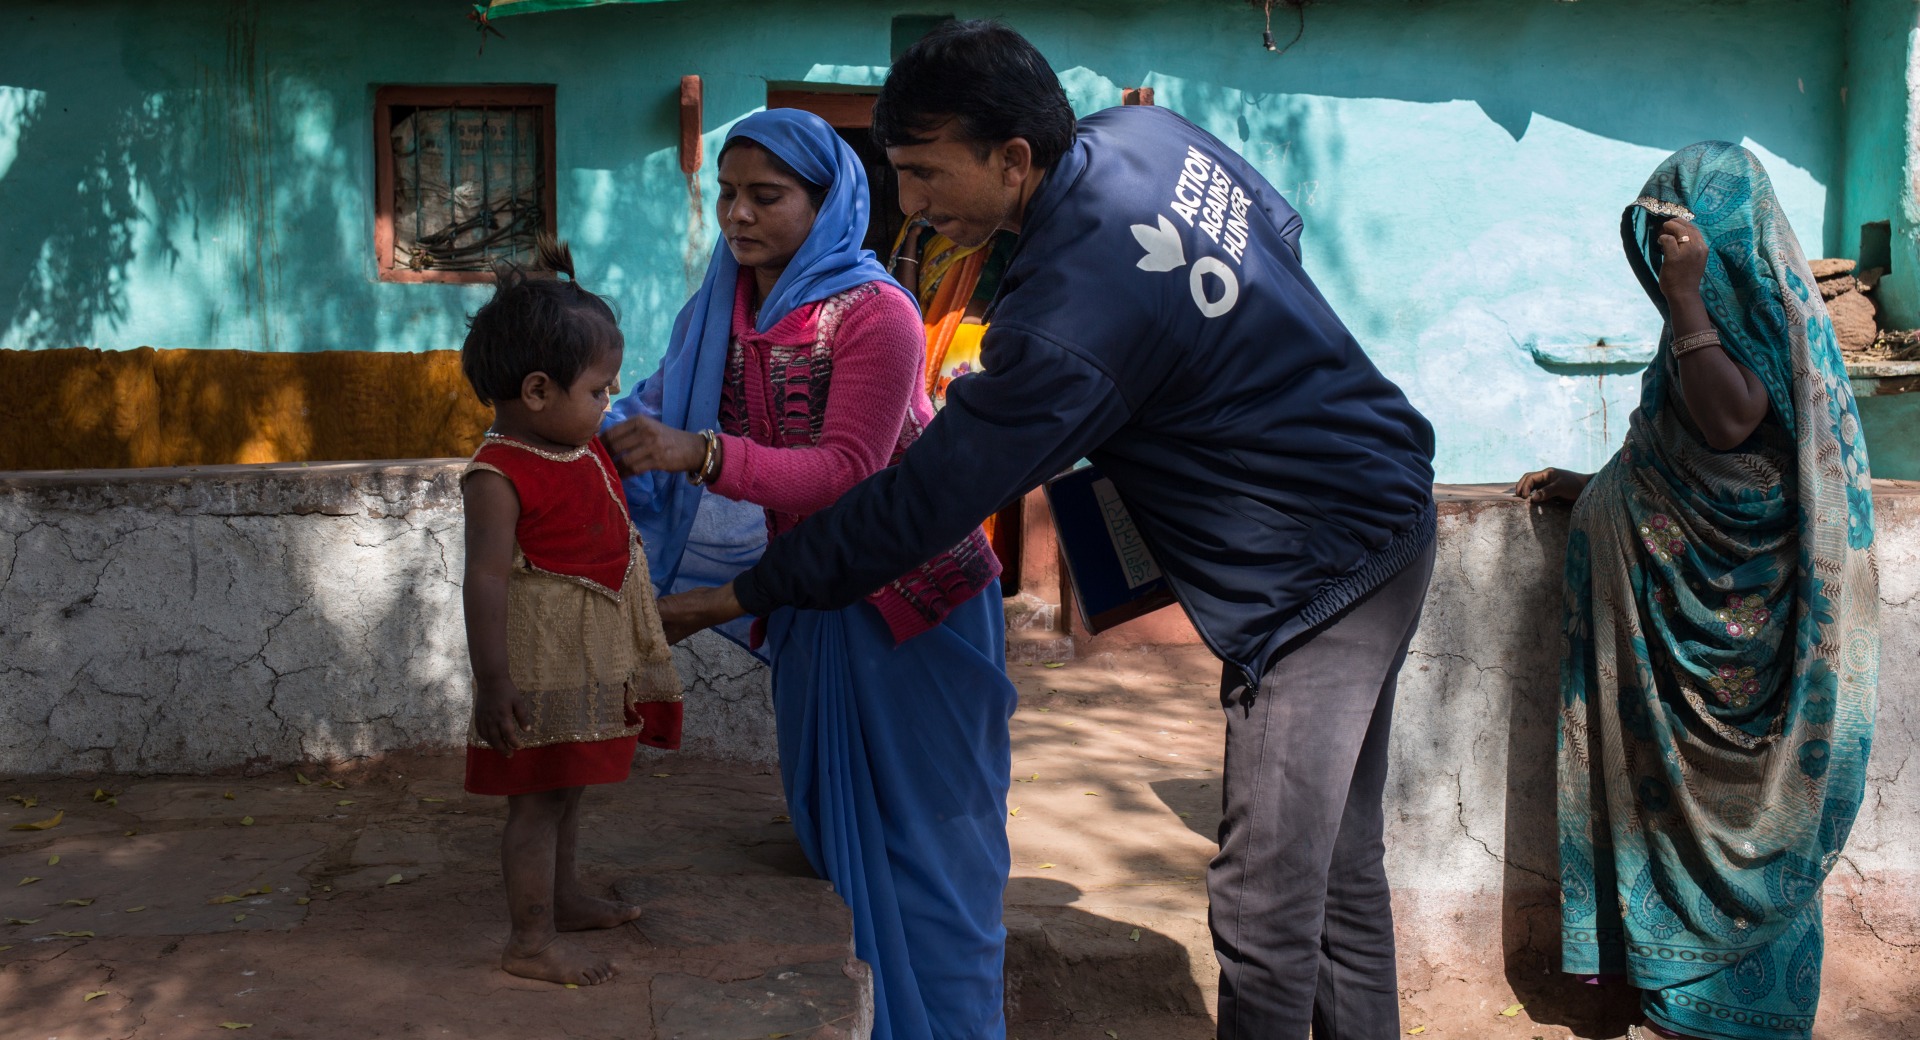 Balram goes door to door in his community, checking up on the health and nutrition of children and families.